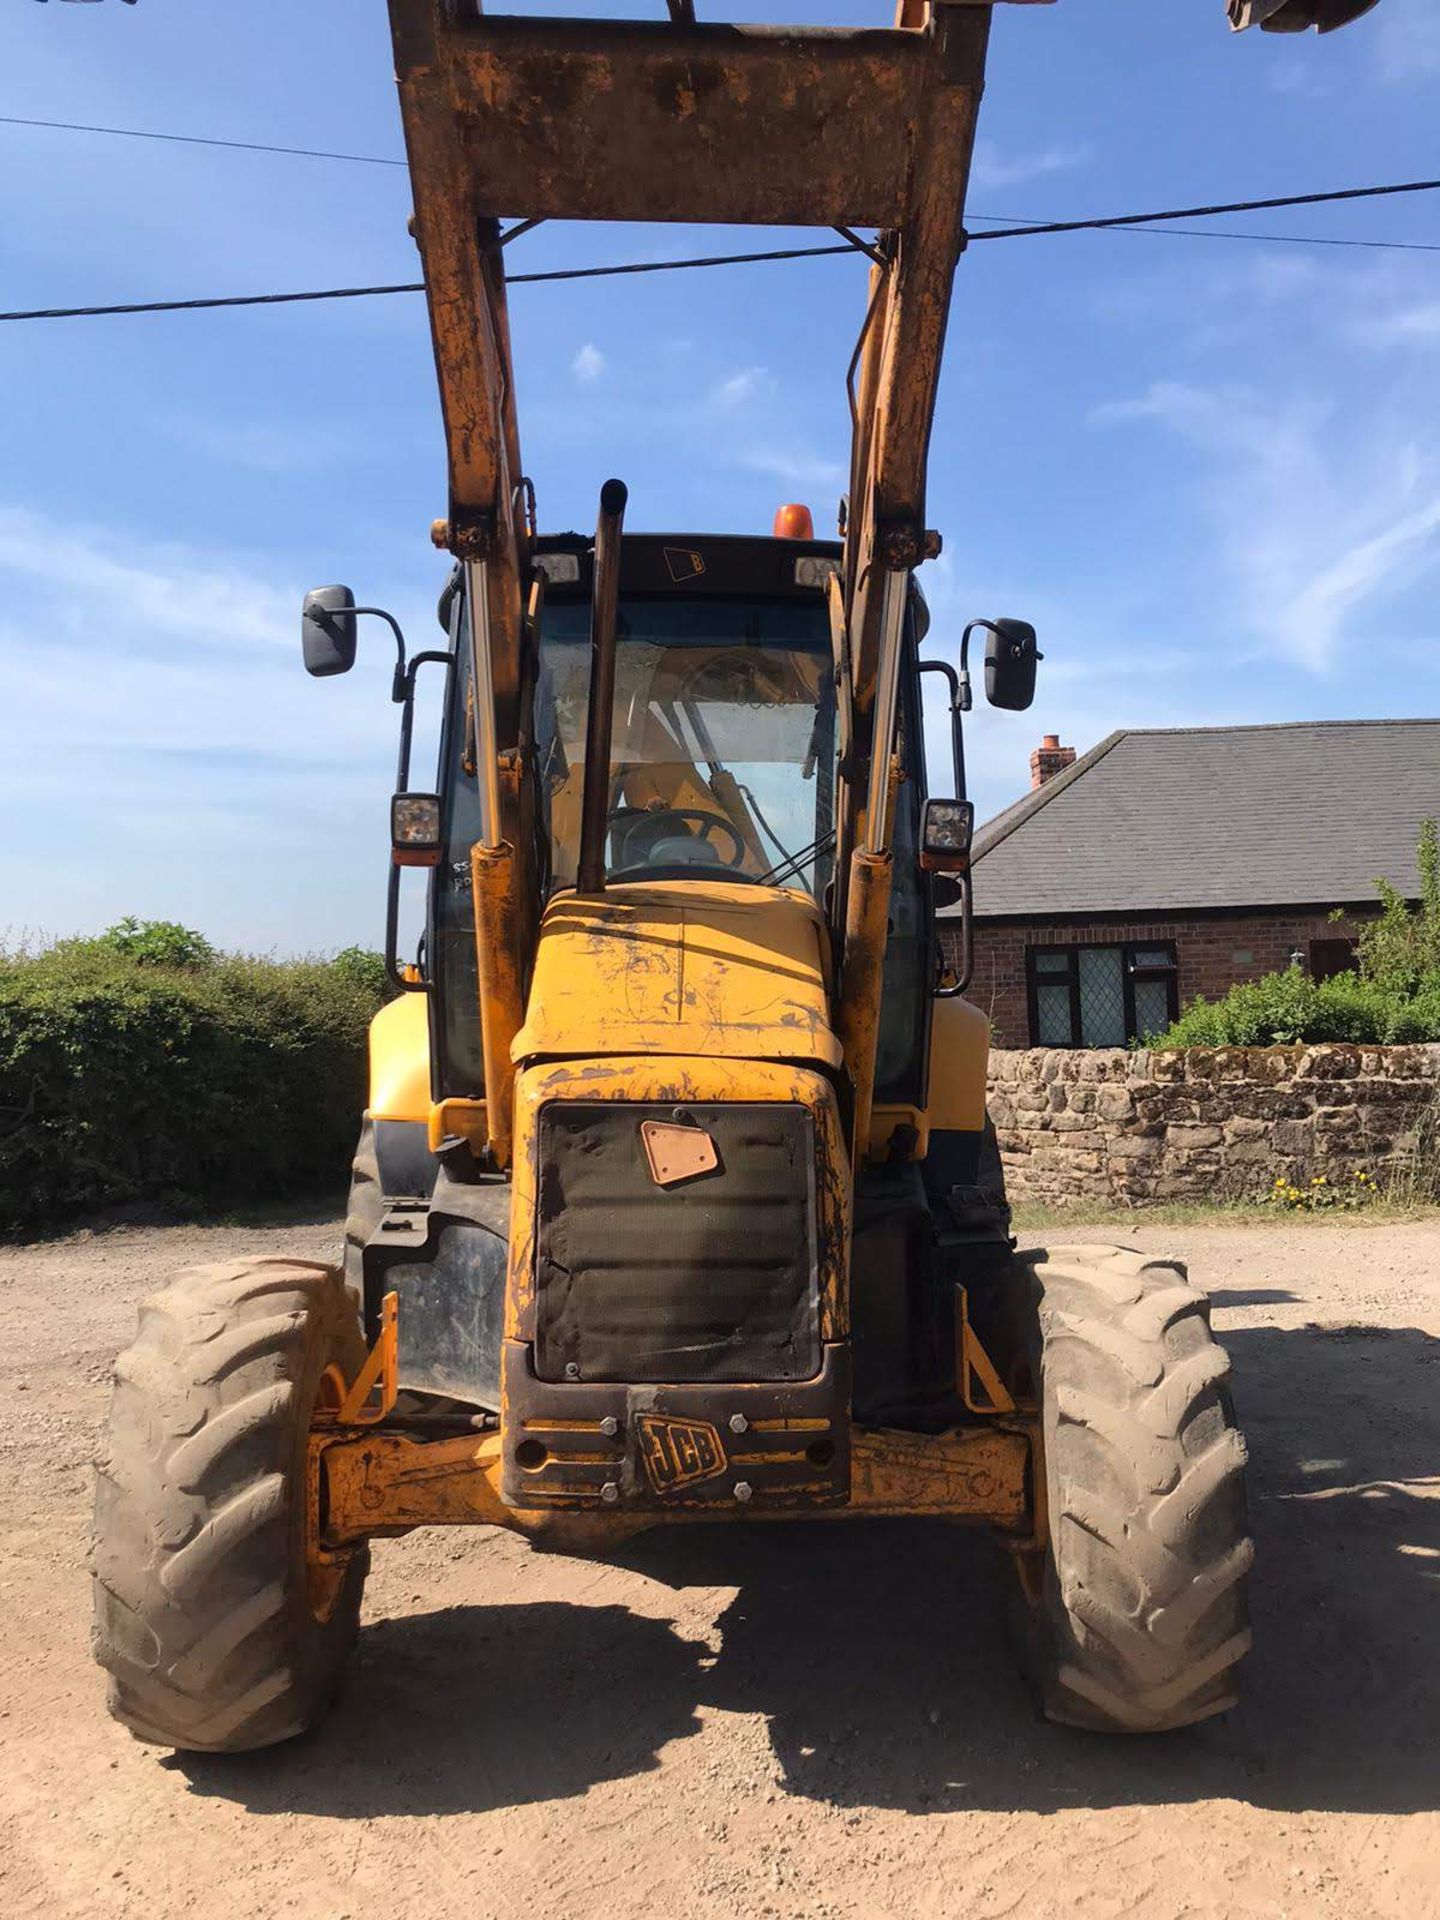 2003 JCB 3CX CONTRACTOR, 4-IN-1 BUCKET, EXPANDING BOOM BACKHOE WITH QUICKHITCH, RUNS, DRIVES, DIGS - Image 2 of 5